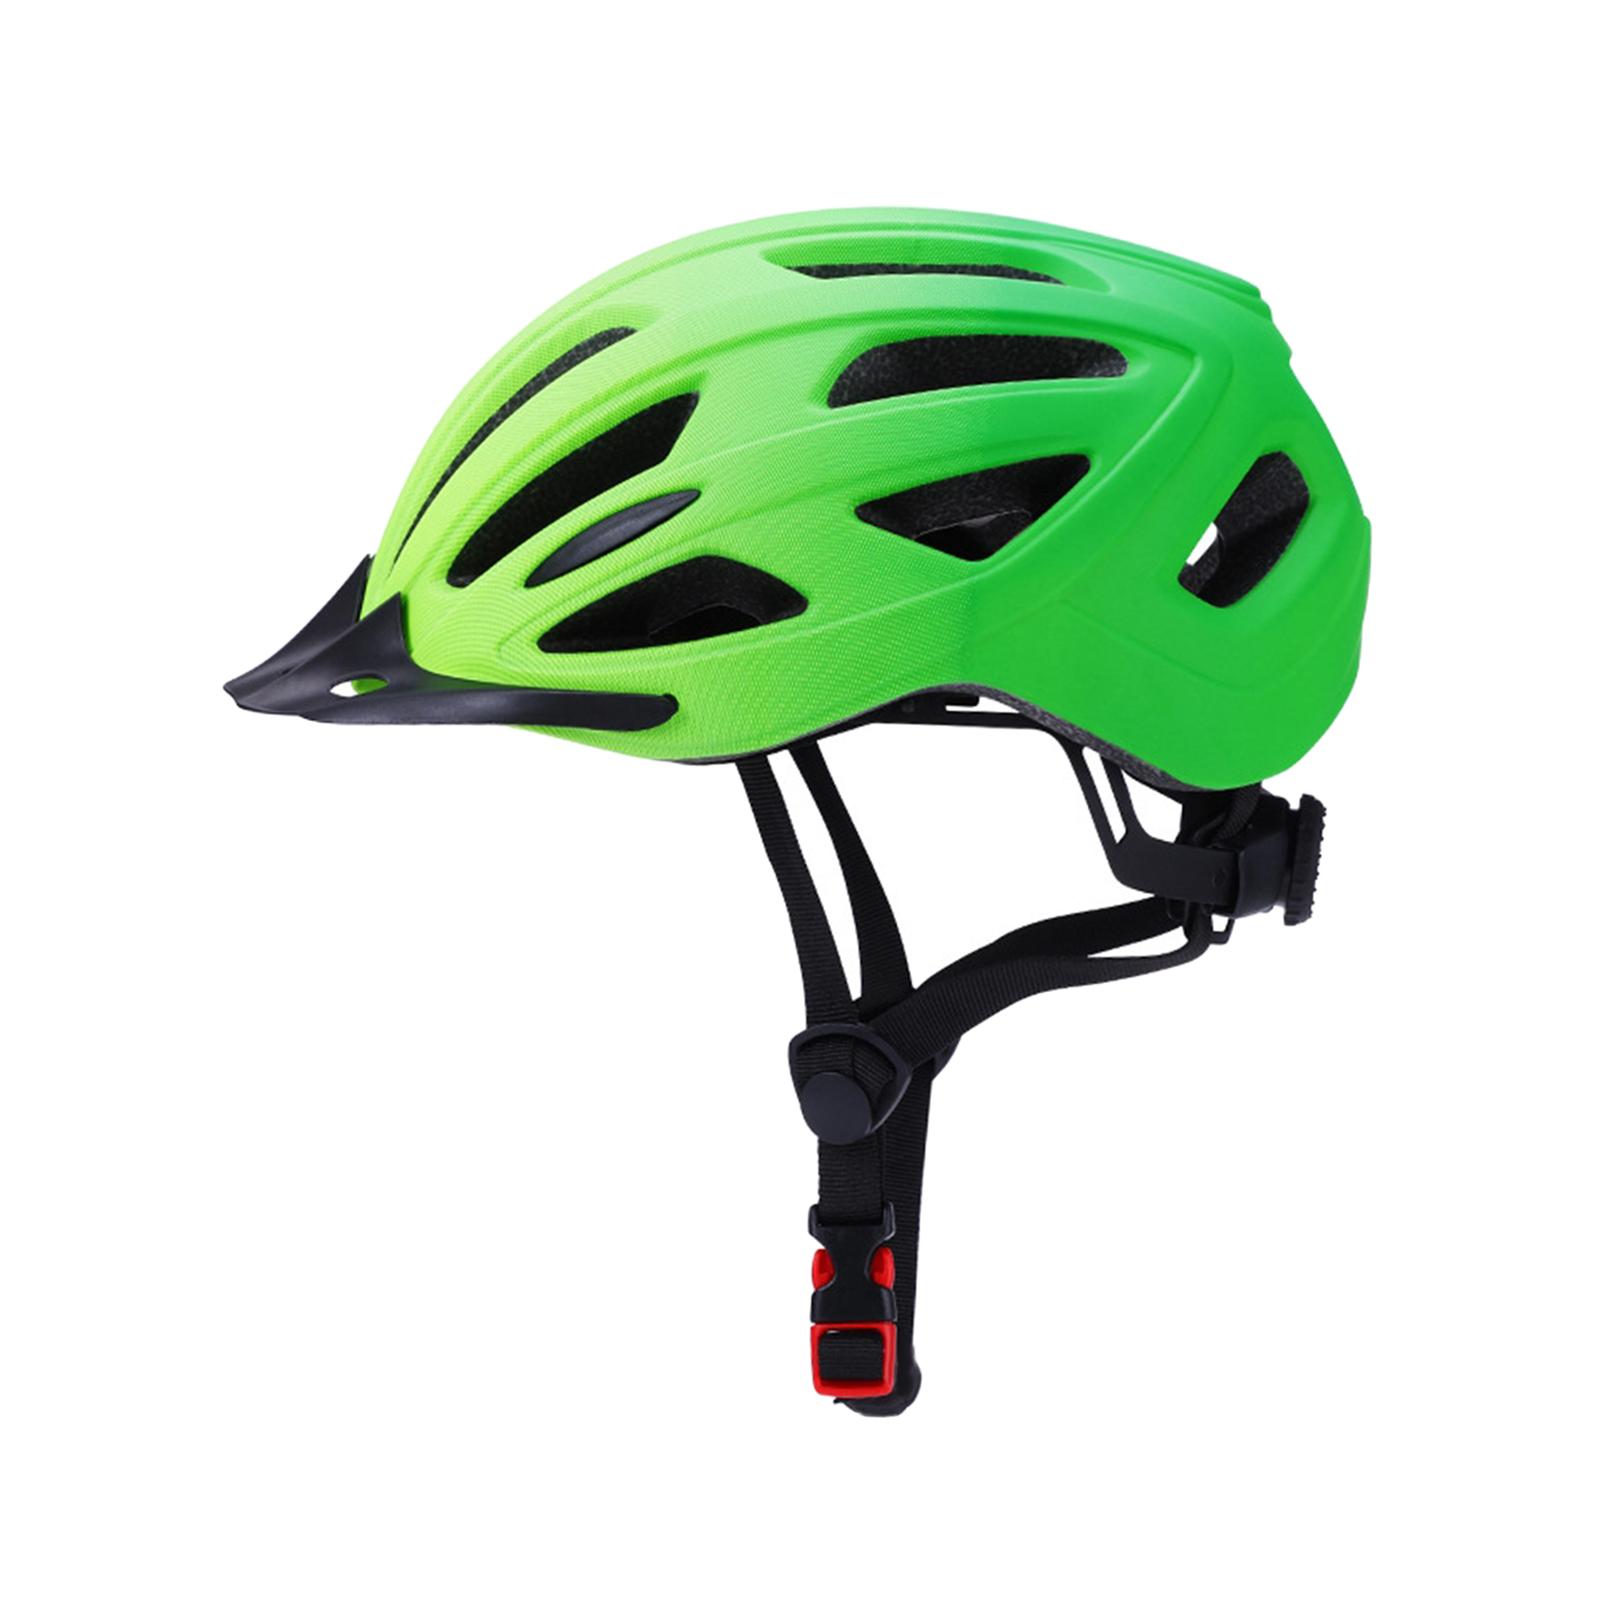 Bicycle Helmet Head Protective Lightweight with LED Safety Light Bike Helmet Green